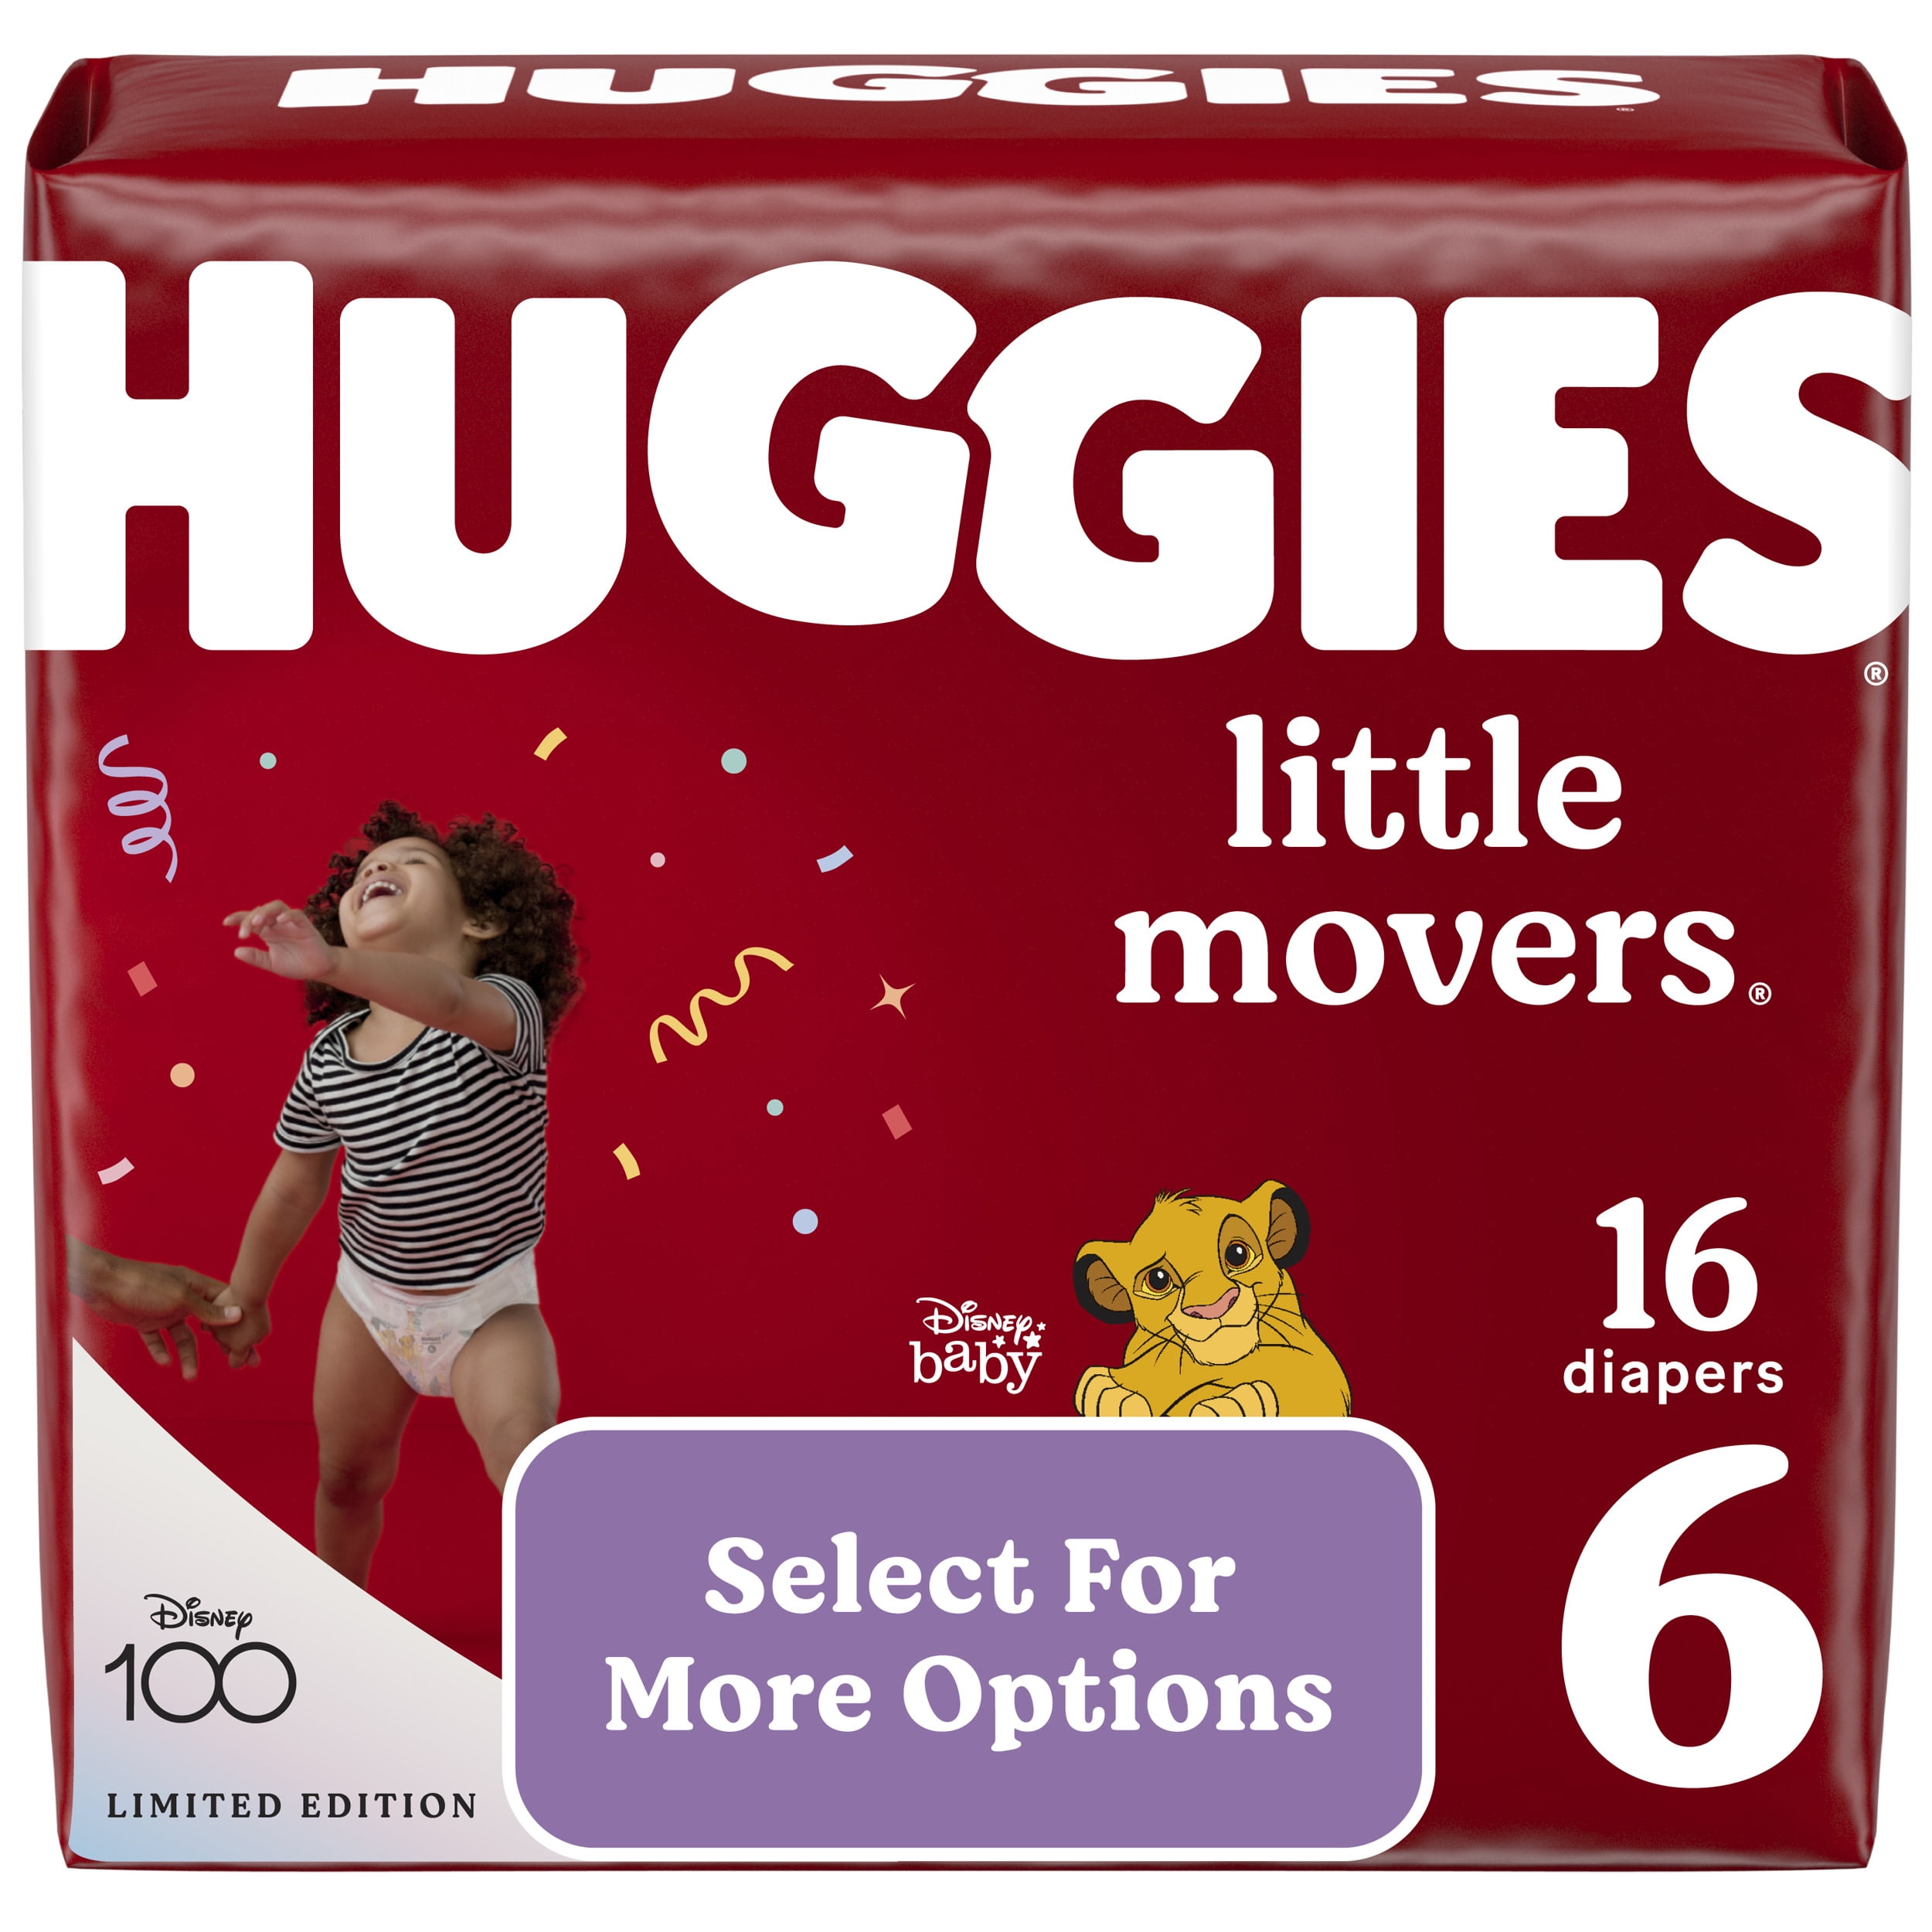 Huggies Little Movers Diapers, Disney Baby, 3 (16-28 lb) - 25 diapers